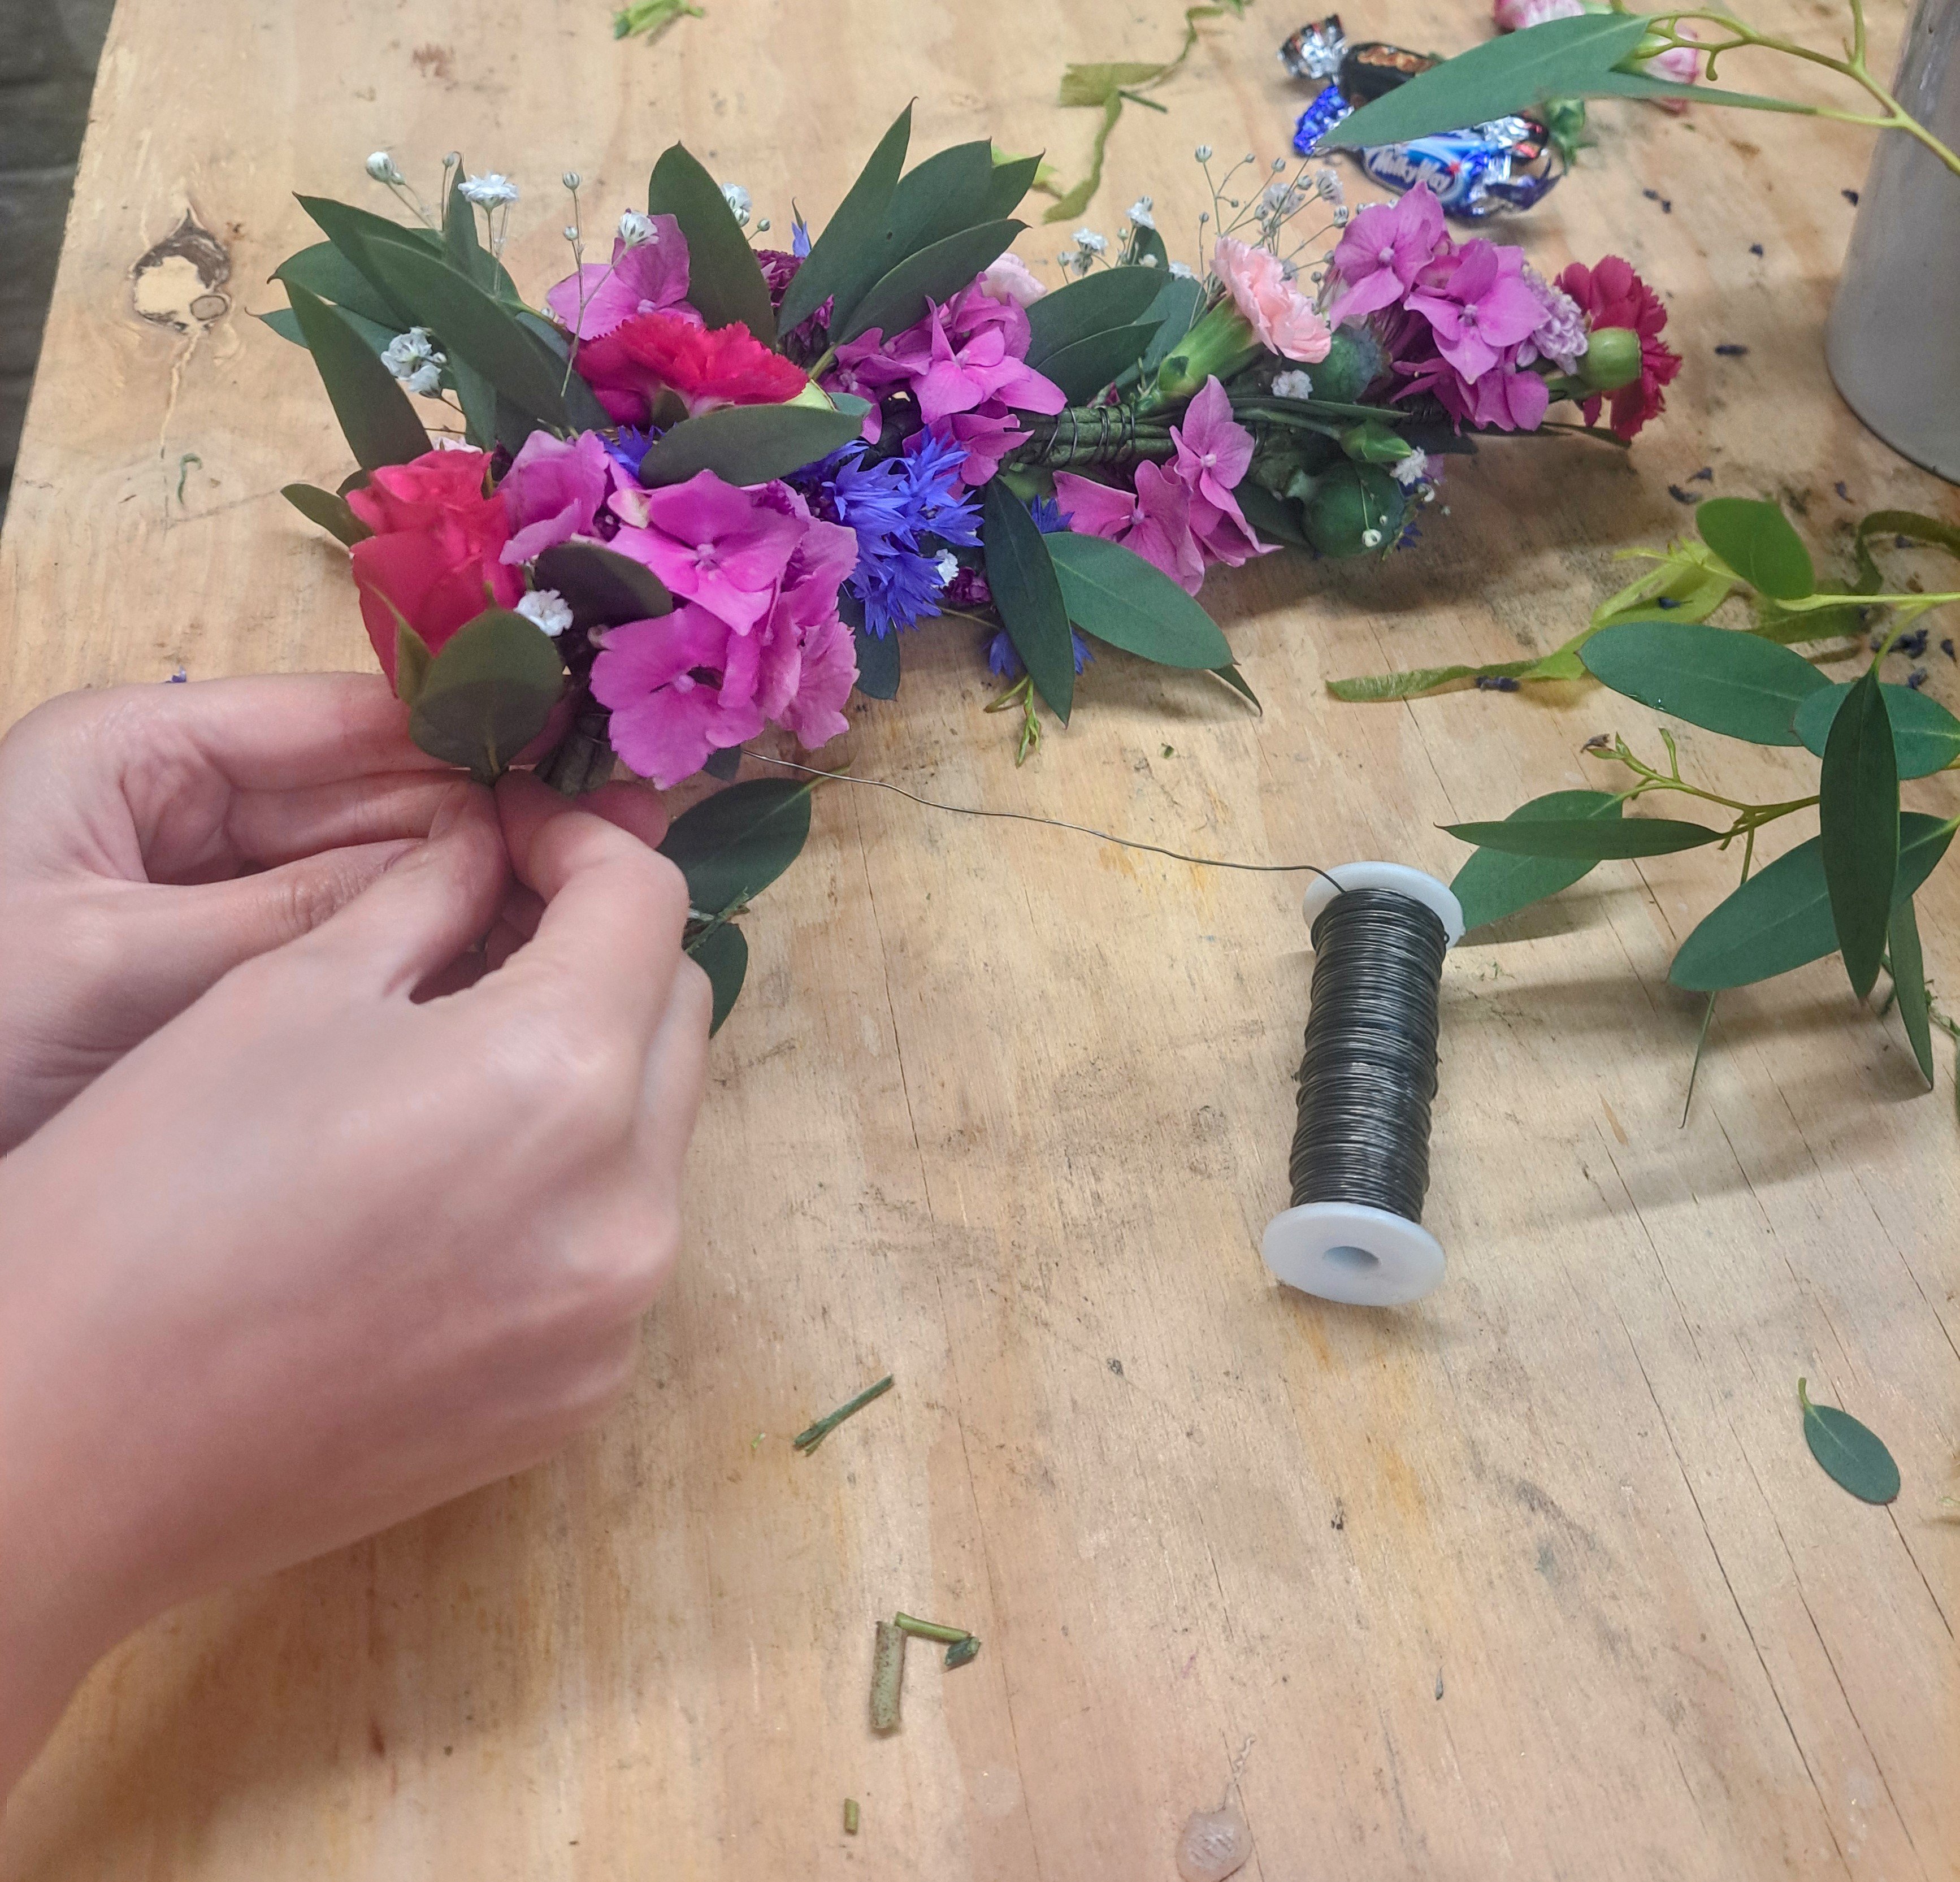 FLOWER CROWN WORKSHOPS for Hen Parties and Special Occasions